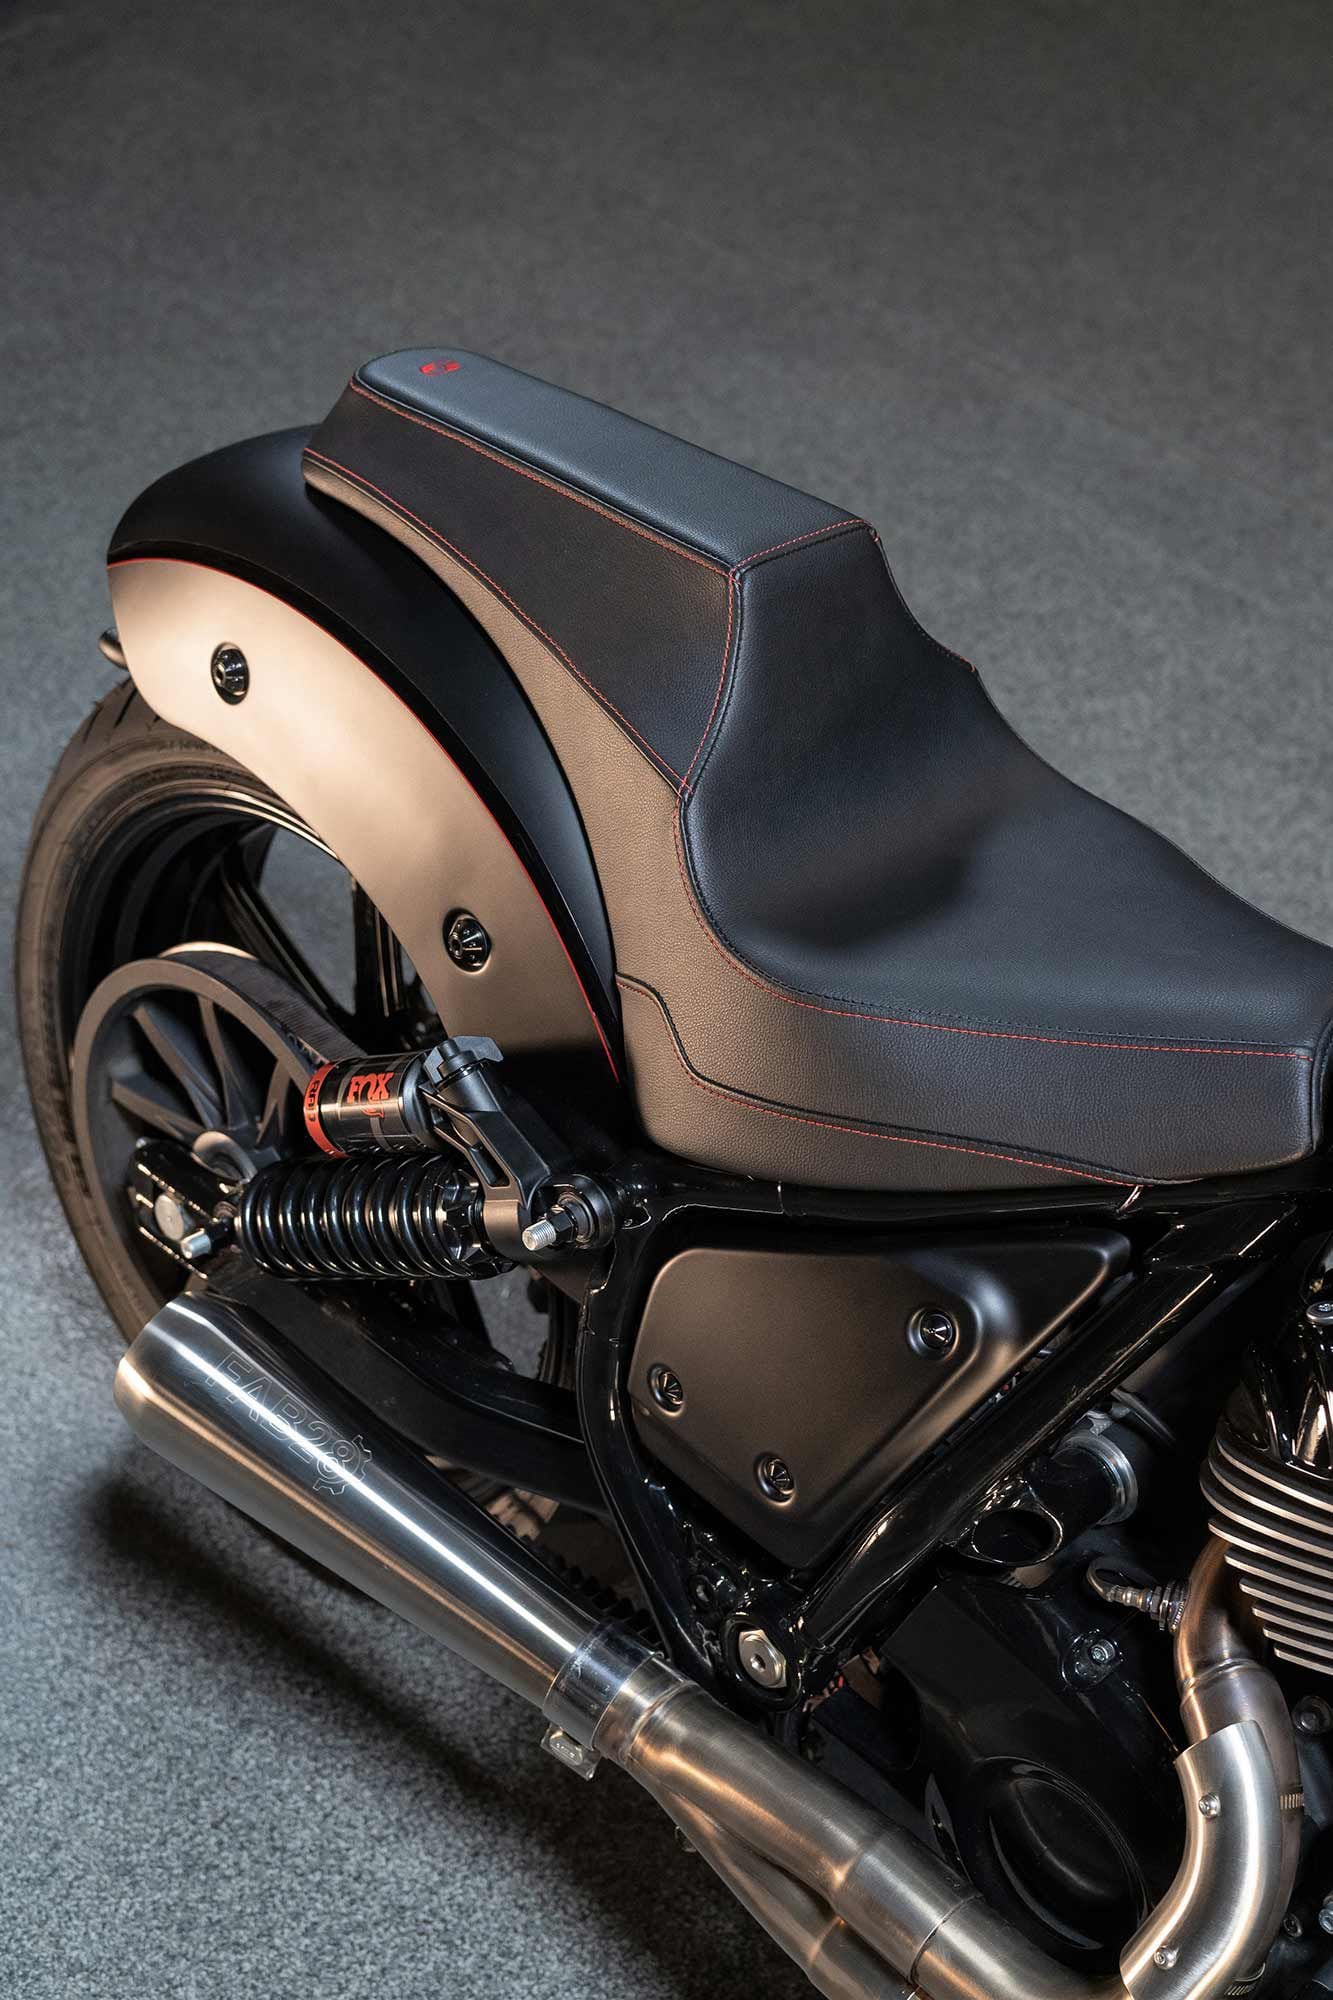 The Saddleman/Hart Luck saddle adds an aggressive shape and gives the bike a clubstyle vibe.